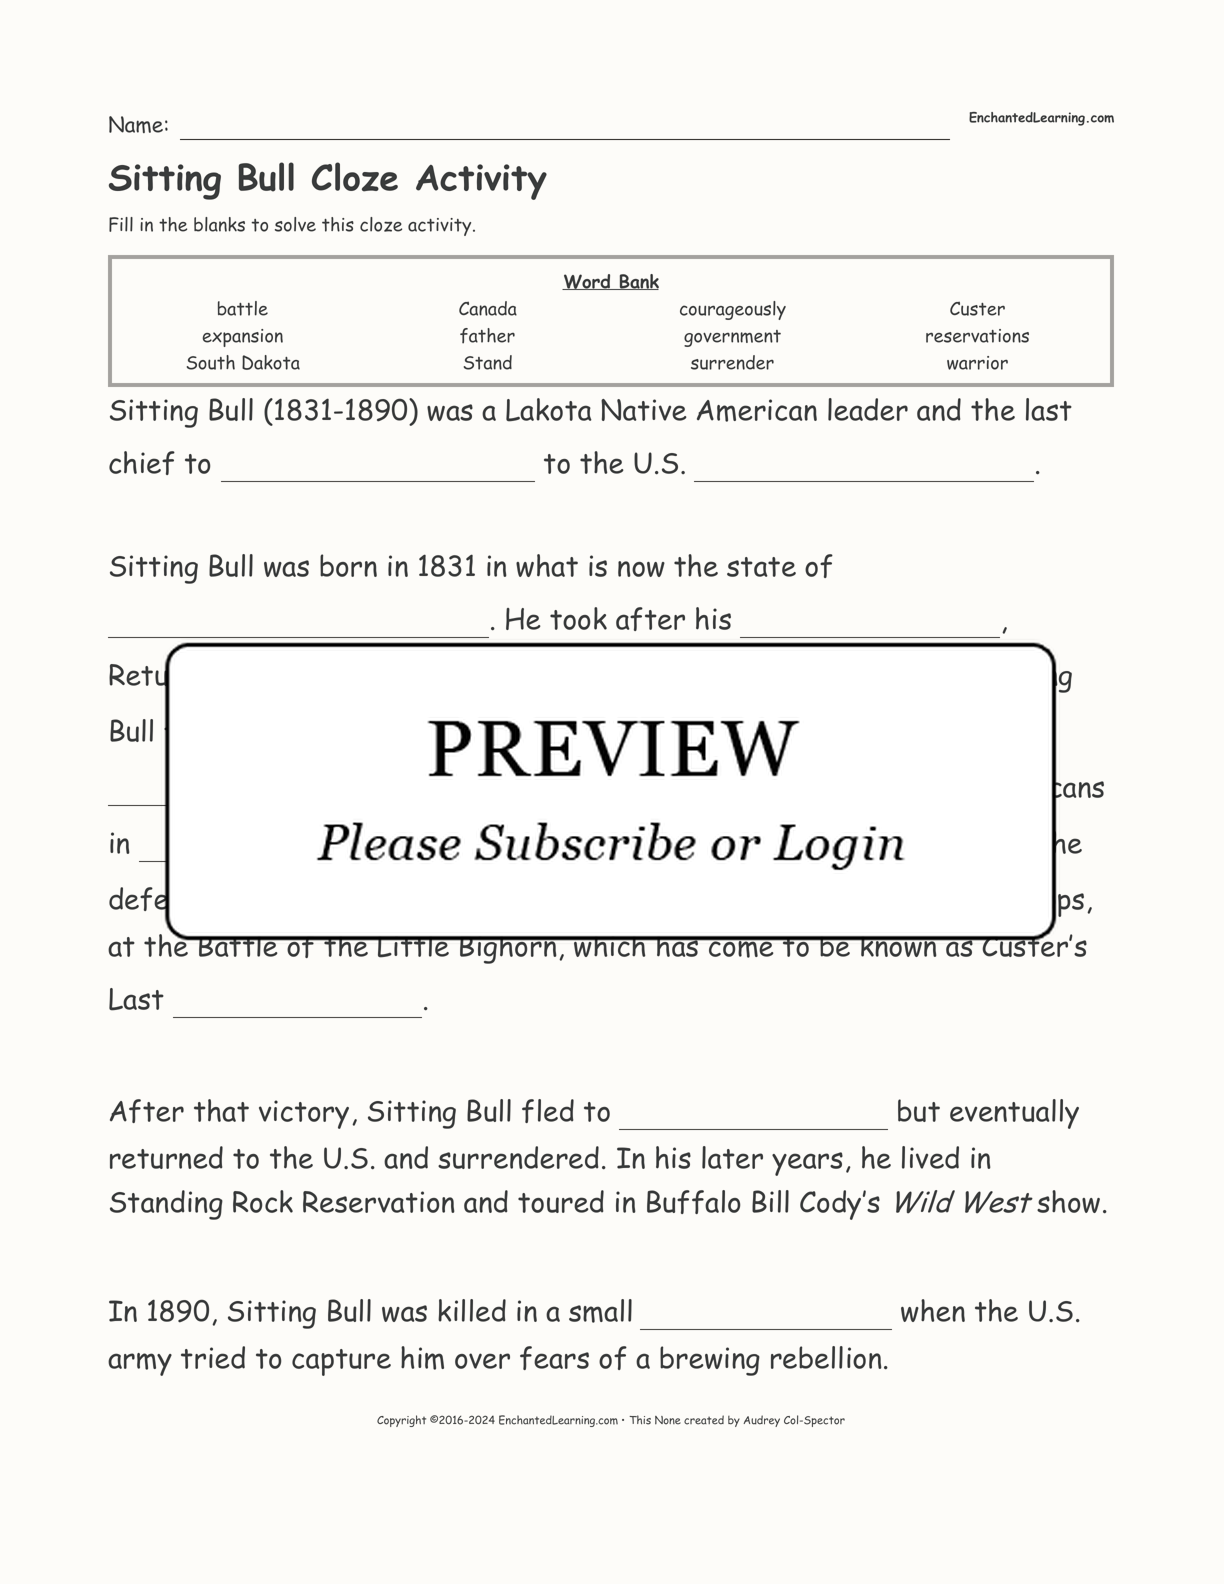 Sitting Bull Cloze Activity interactive worksheet page 1